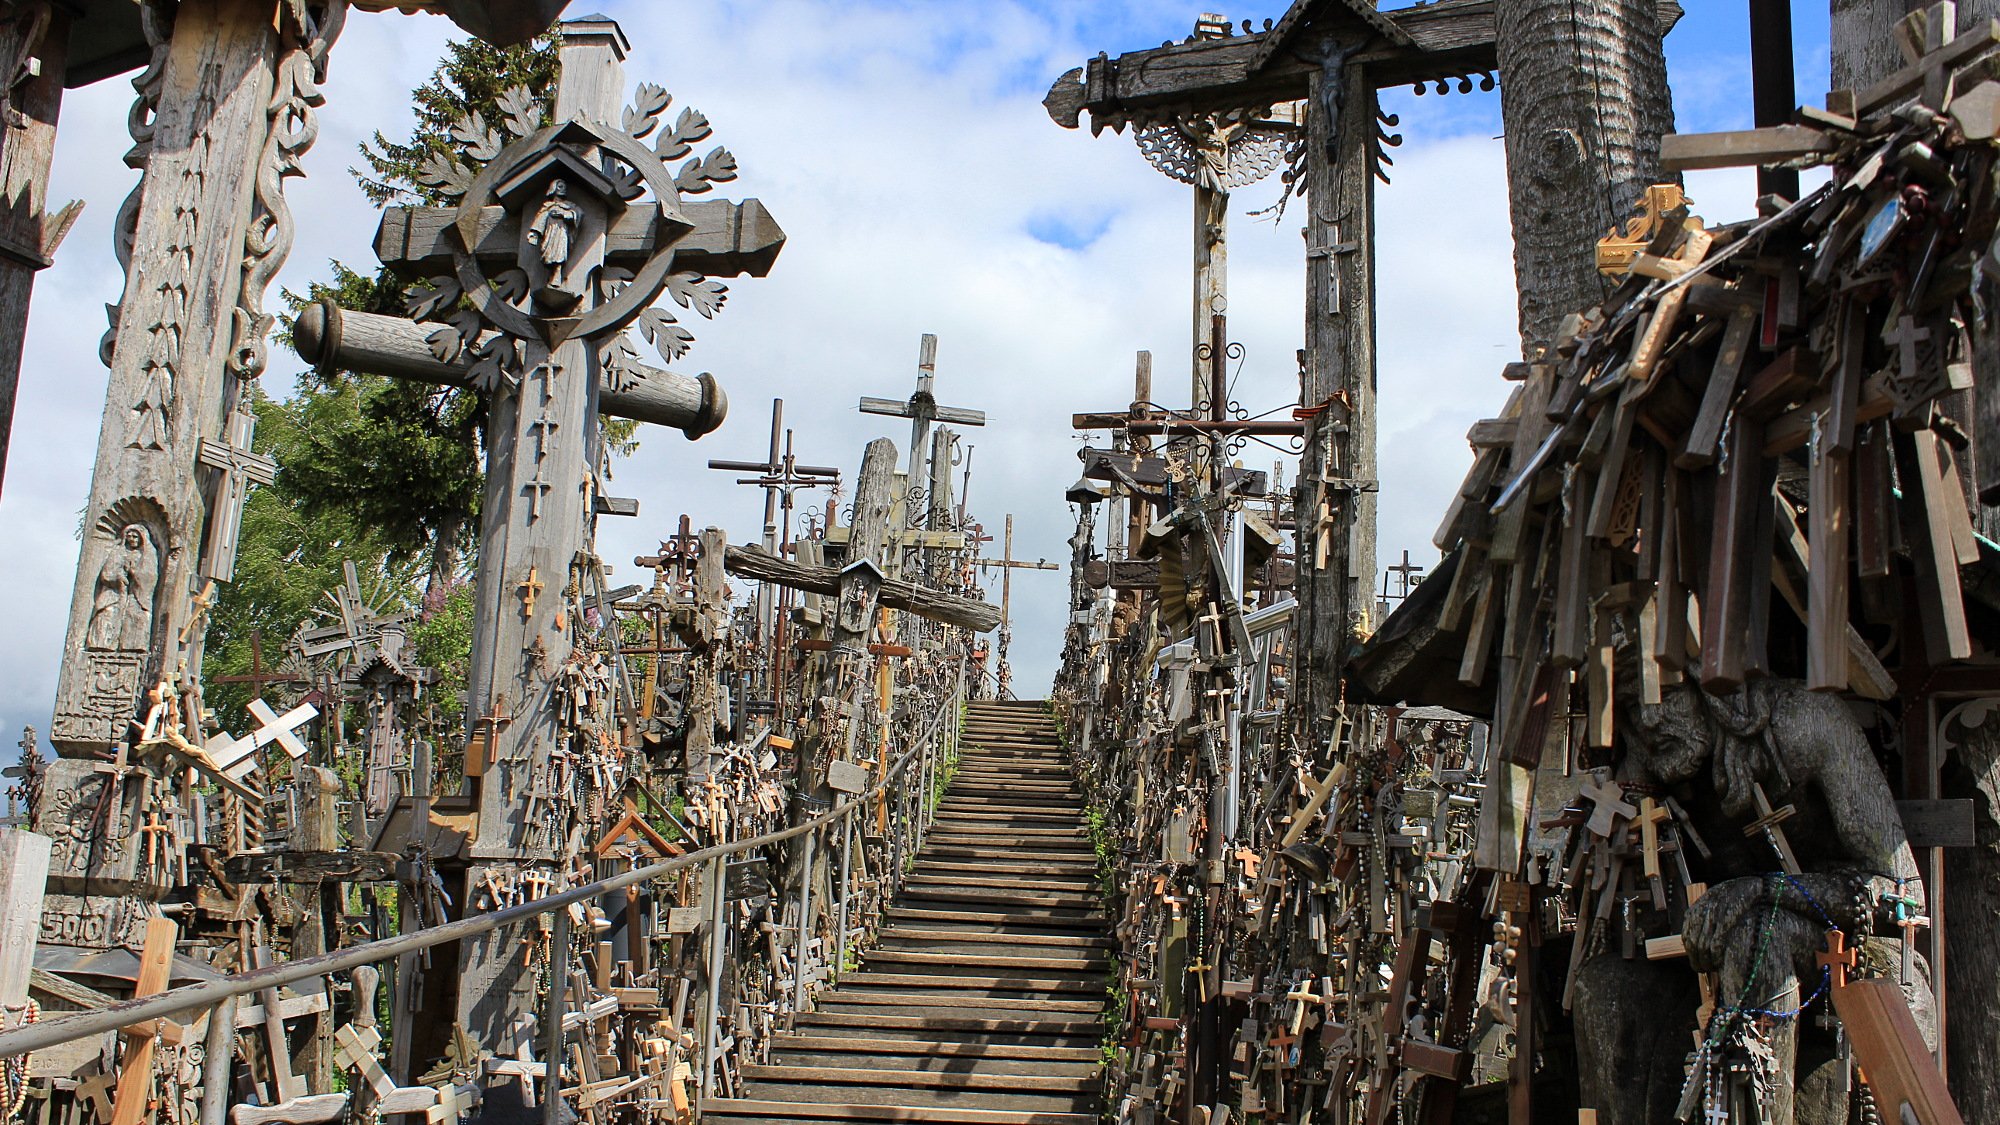 A small wooden path between lines of crosses and crucifixes.